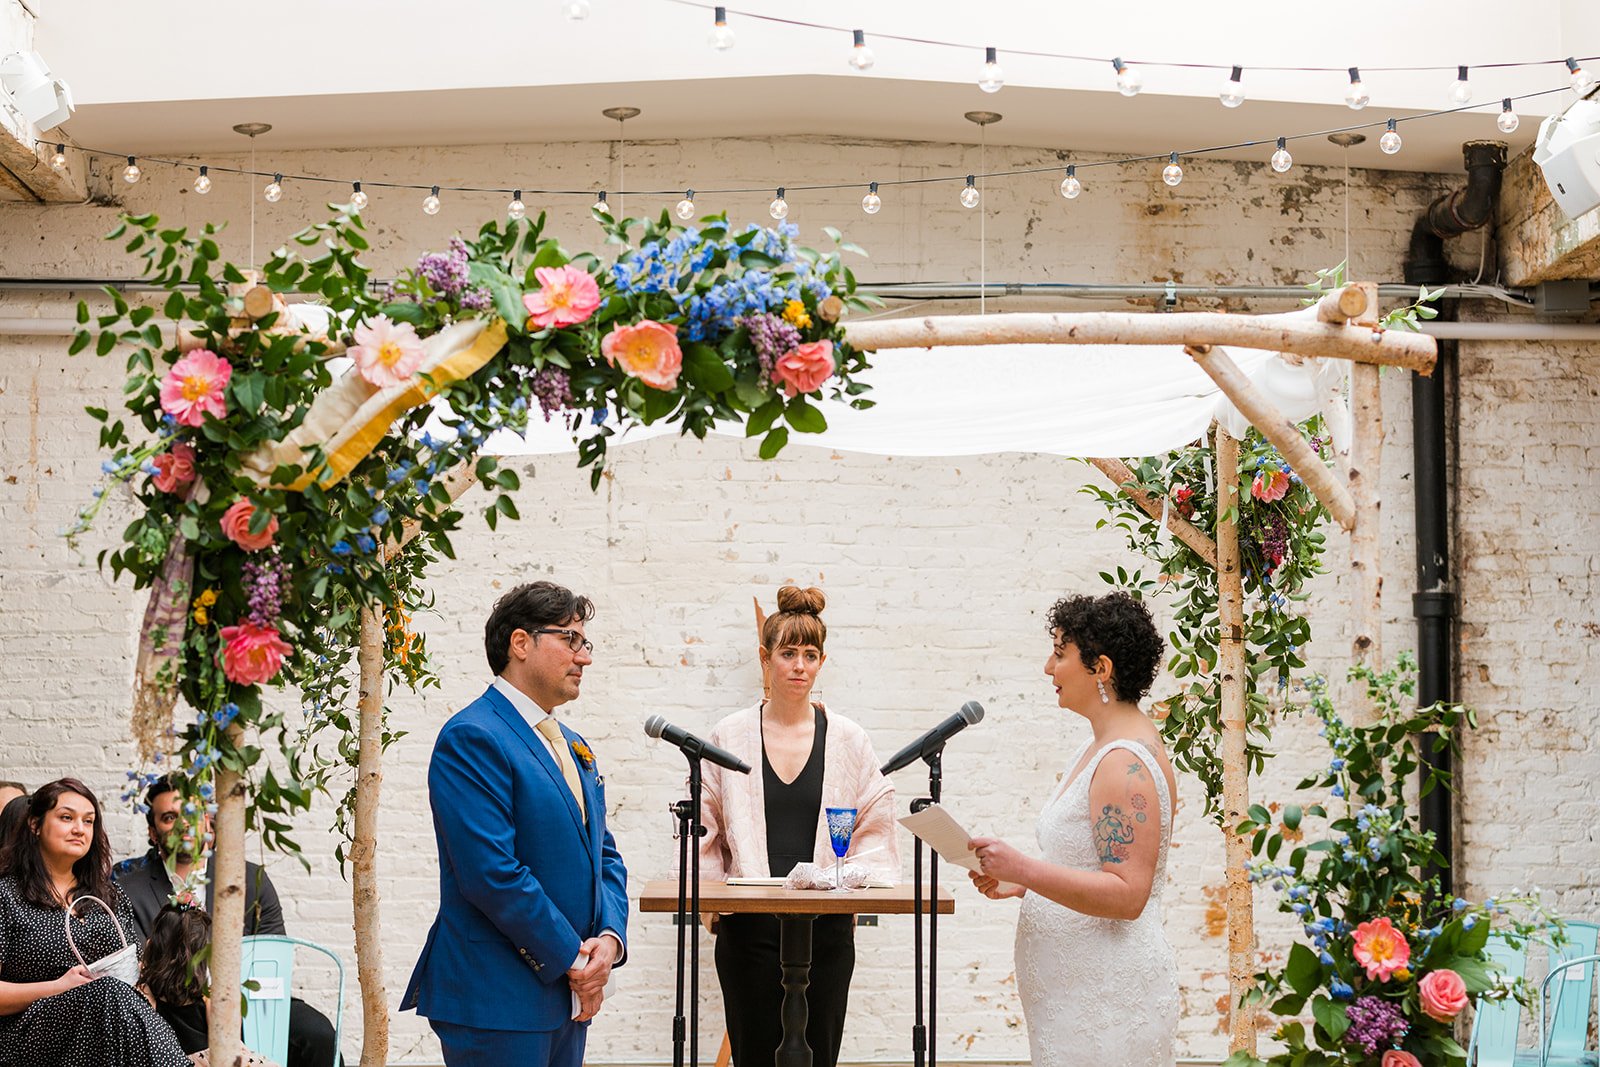  Candid, documentary photo of the bride reading their vows to the groom under chupah during their nontraditional Jewish and Venezuelan wedding ceremony in the round at The Joinery Chicago an Industrial loft wedding venue In Logan Square. 